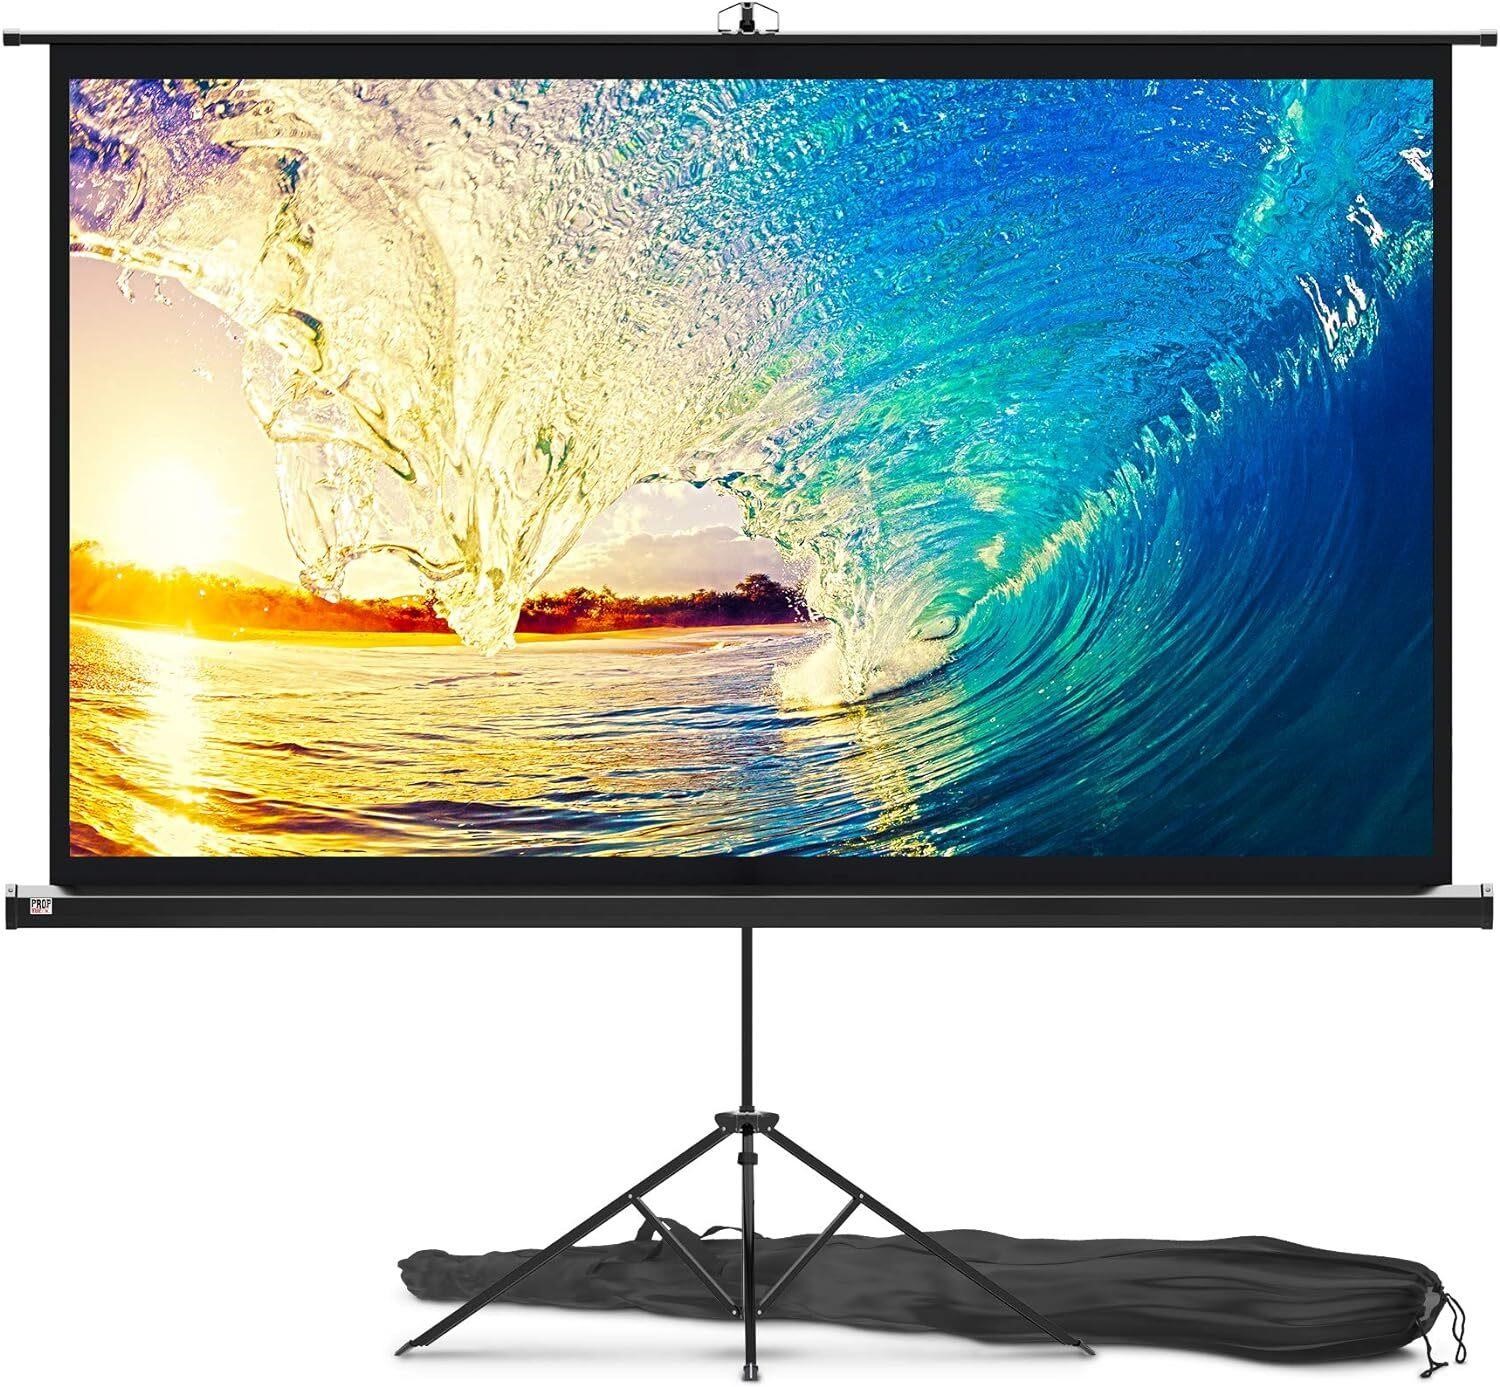 84 Projector Screen w/ Stand - 16:9 - Black